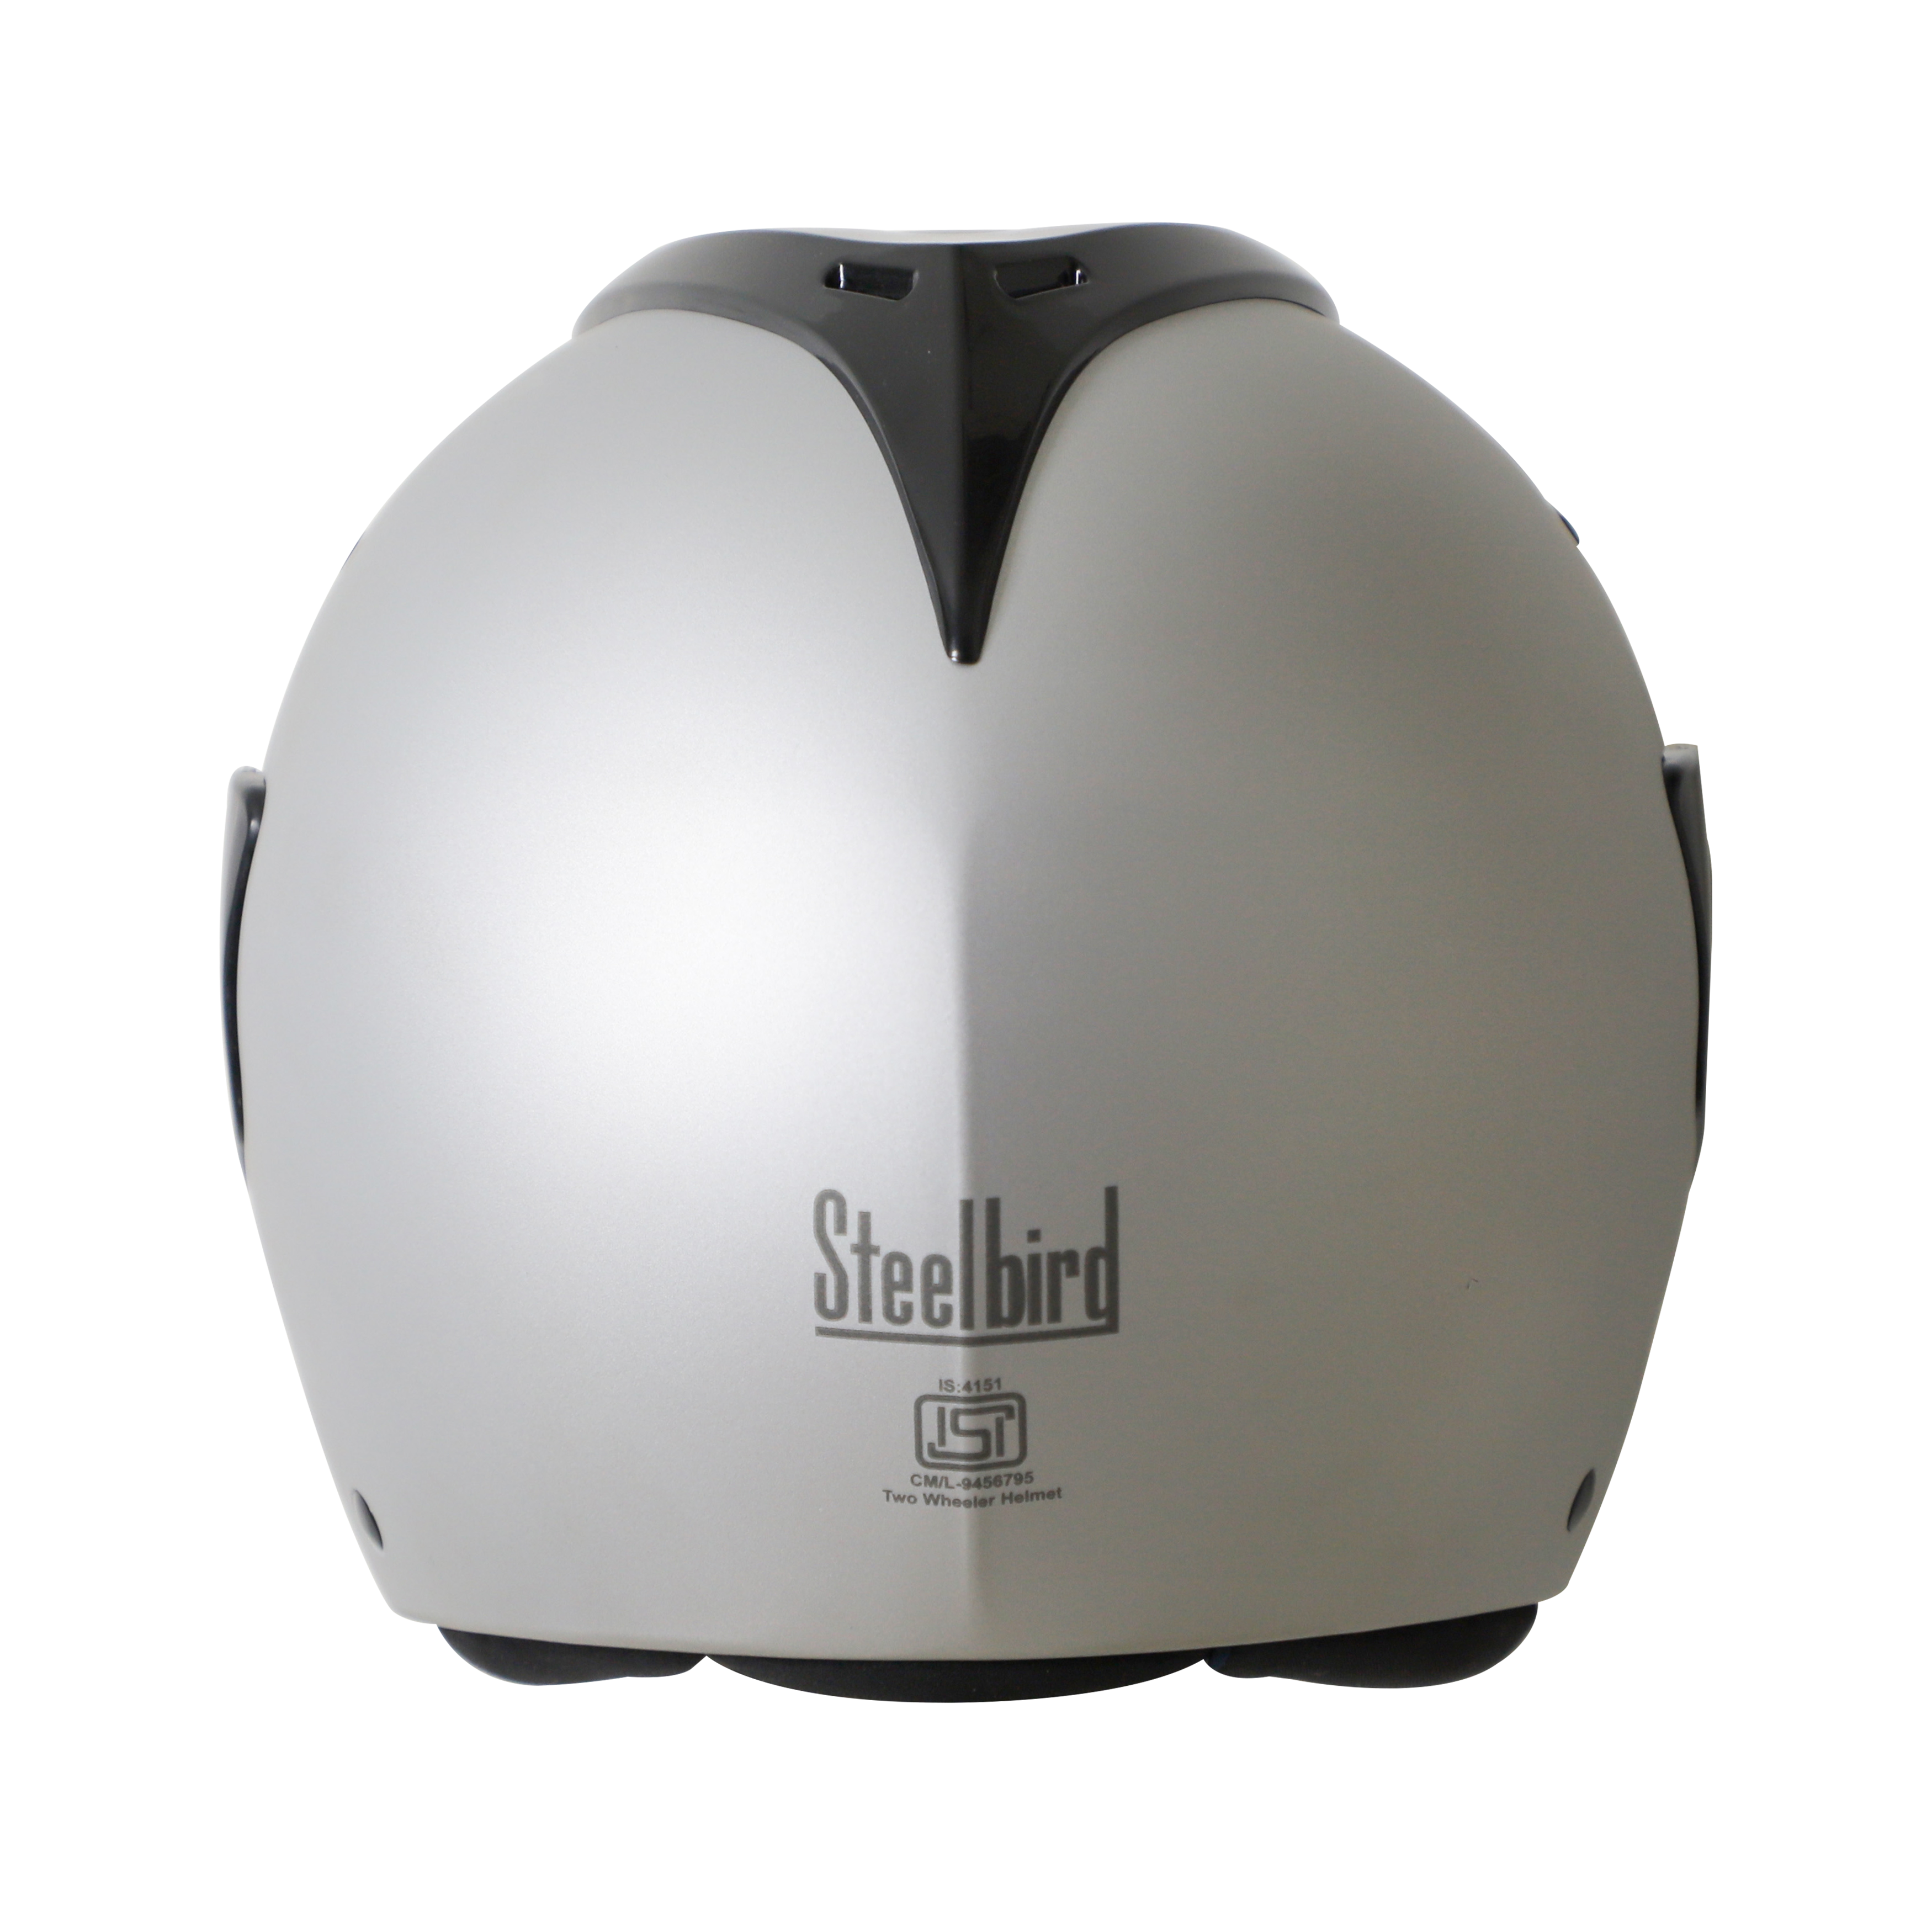 Steelbird SB-34 ISI Certified Flip-Up Helmet For Men And Women (Glossy Silver With Smoke Visor)